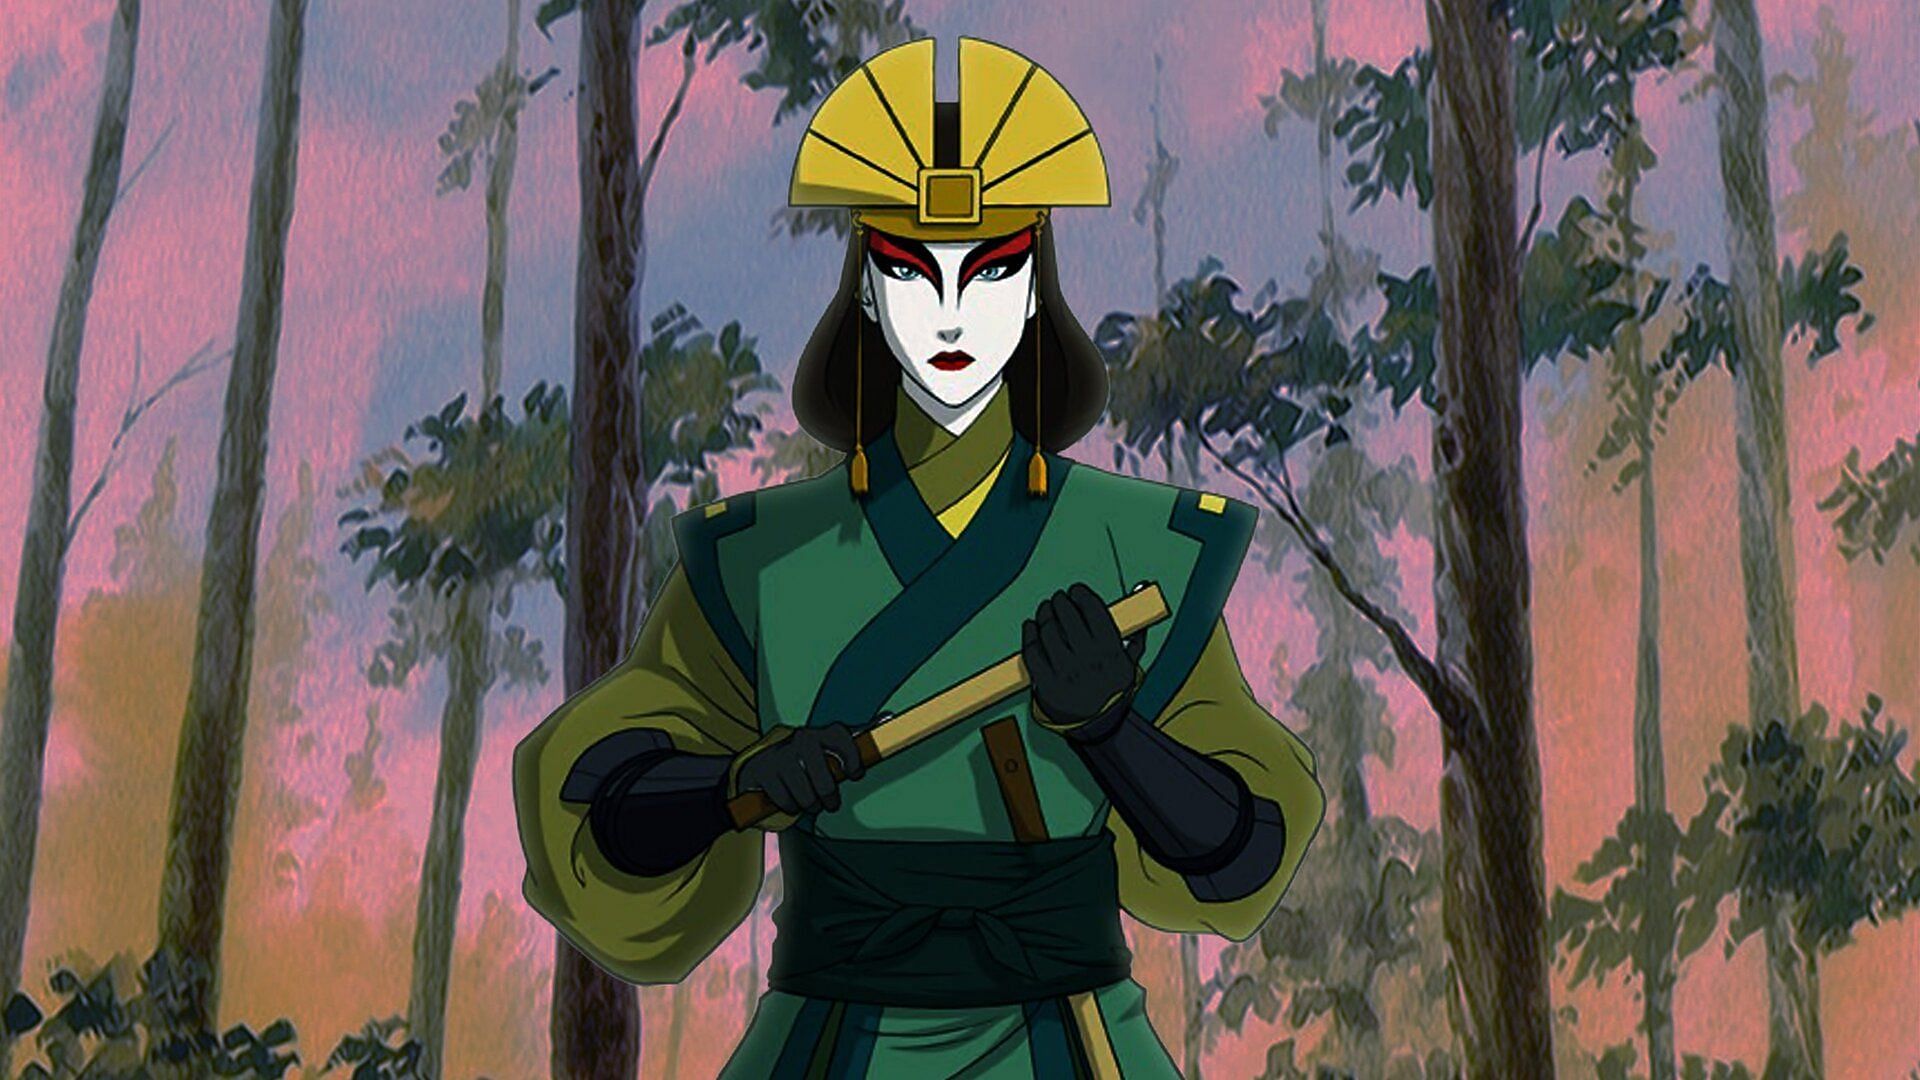 Kyoshi as seen in official artwork for the franchise (Image via Nickelodeon)